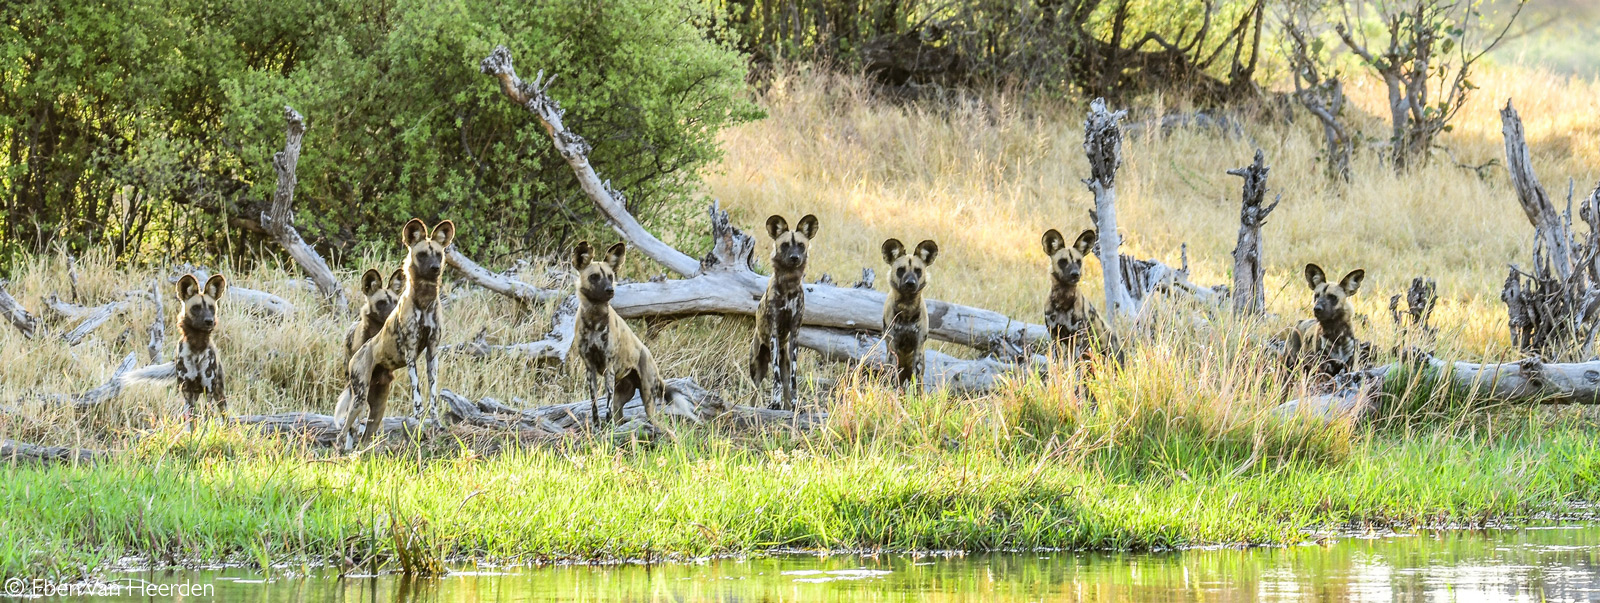 A pack of painted wolves (African wild dogs) watch a herd of impala on the other side of the Khwai River. Okavango Delta, Botswana © Eben Van Heerden